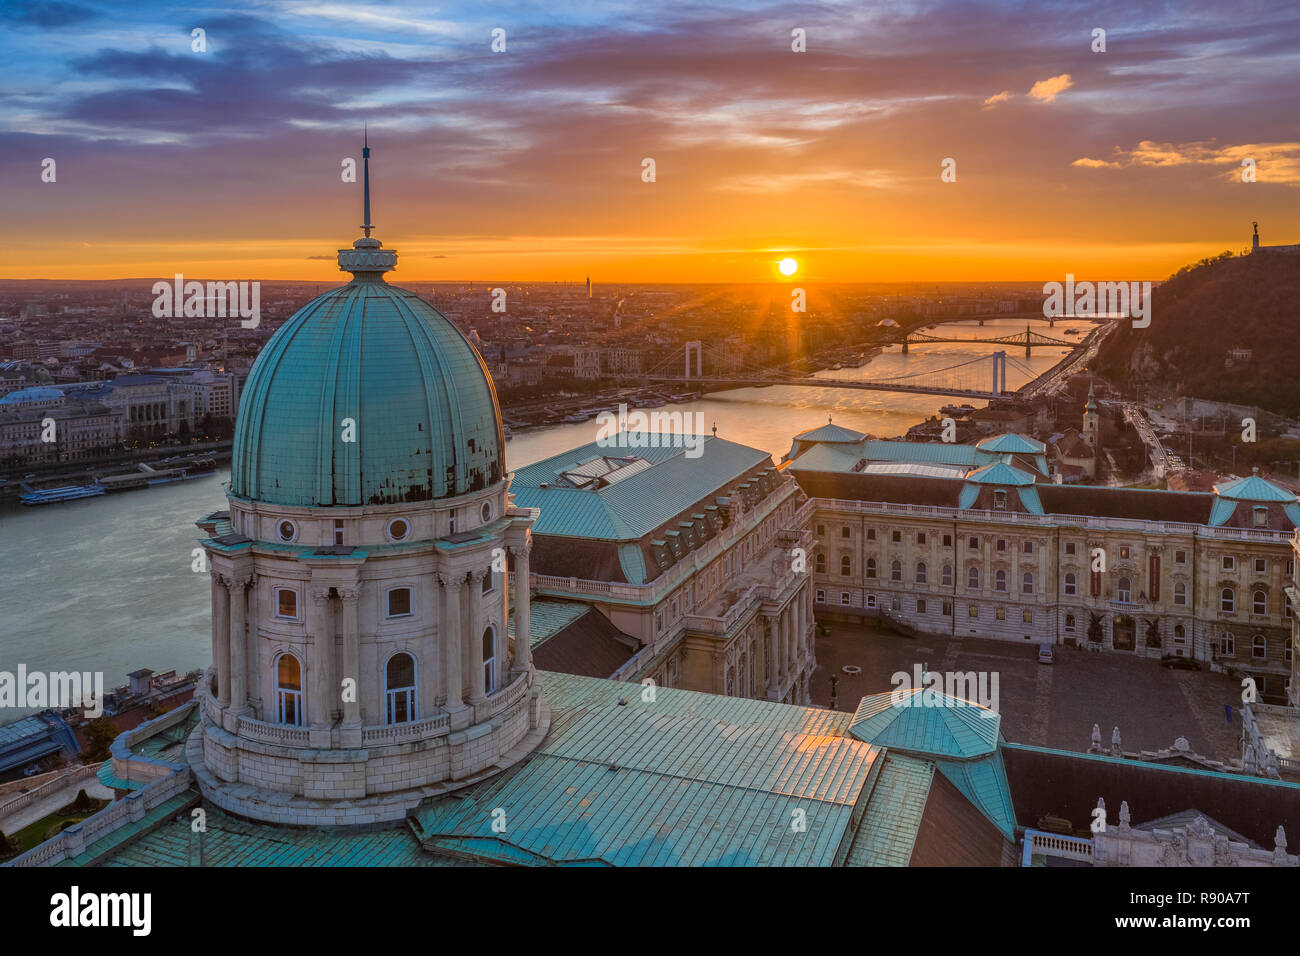 Budapest, Hungary - Aerial view of the dome of Buda Castle Royal palace at sunrise with Liberty Bridge, Elisabeth Bridge and Statue of Liberty Stock Photo